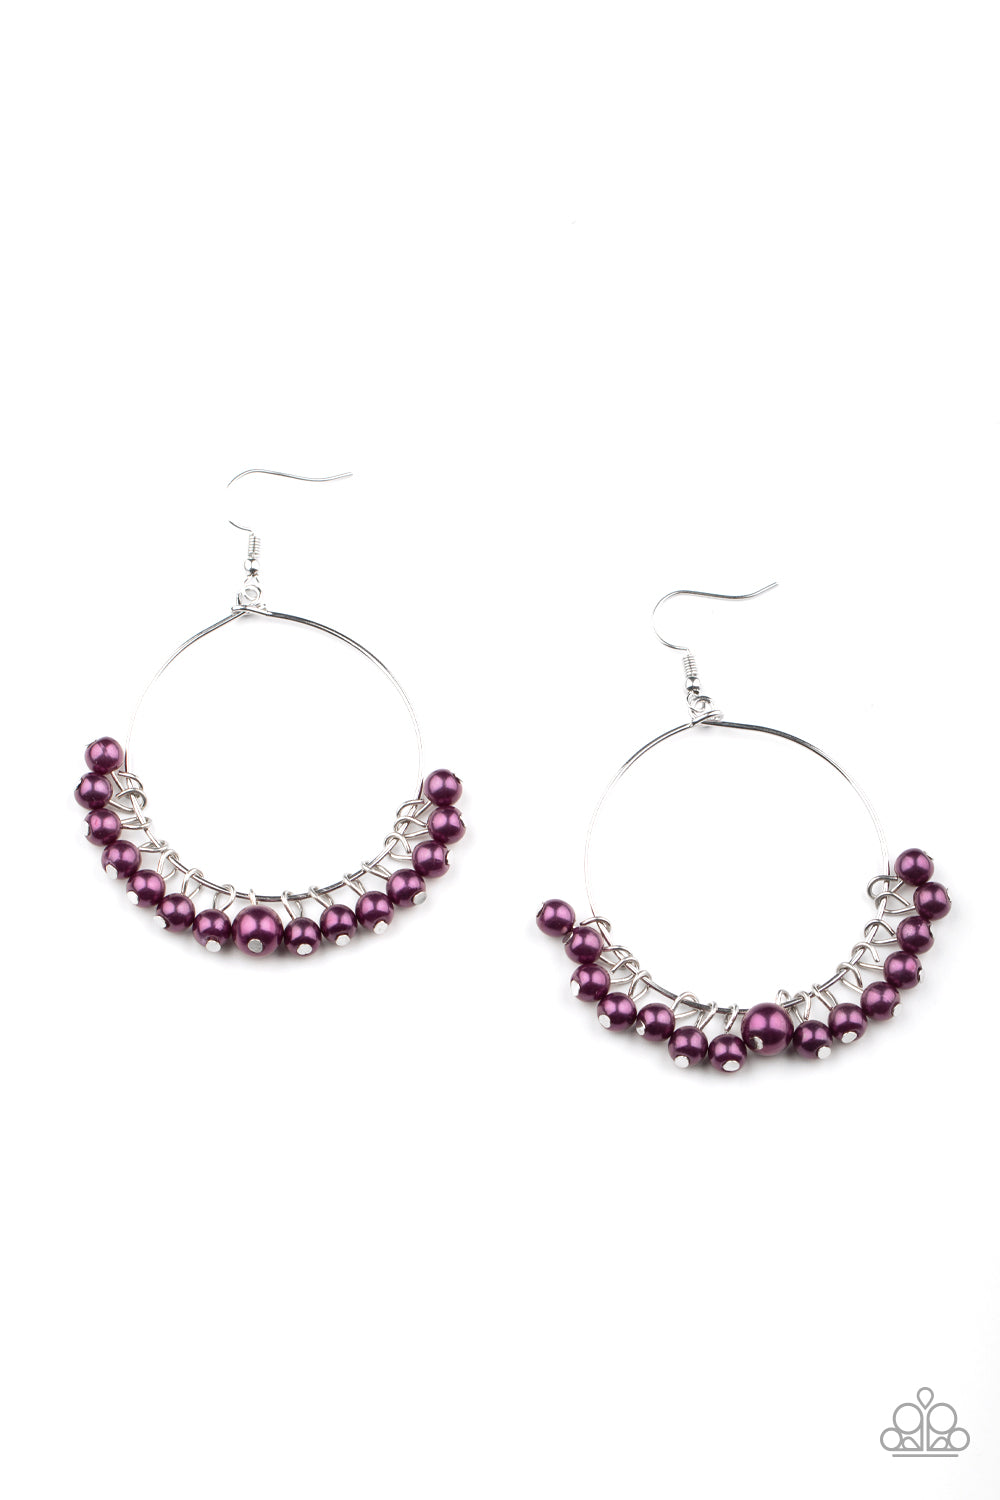 five-dollar-jewelry-things-are-looking-upscale-purple-earrings-paparazzi-accessories